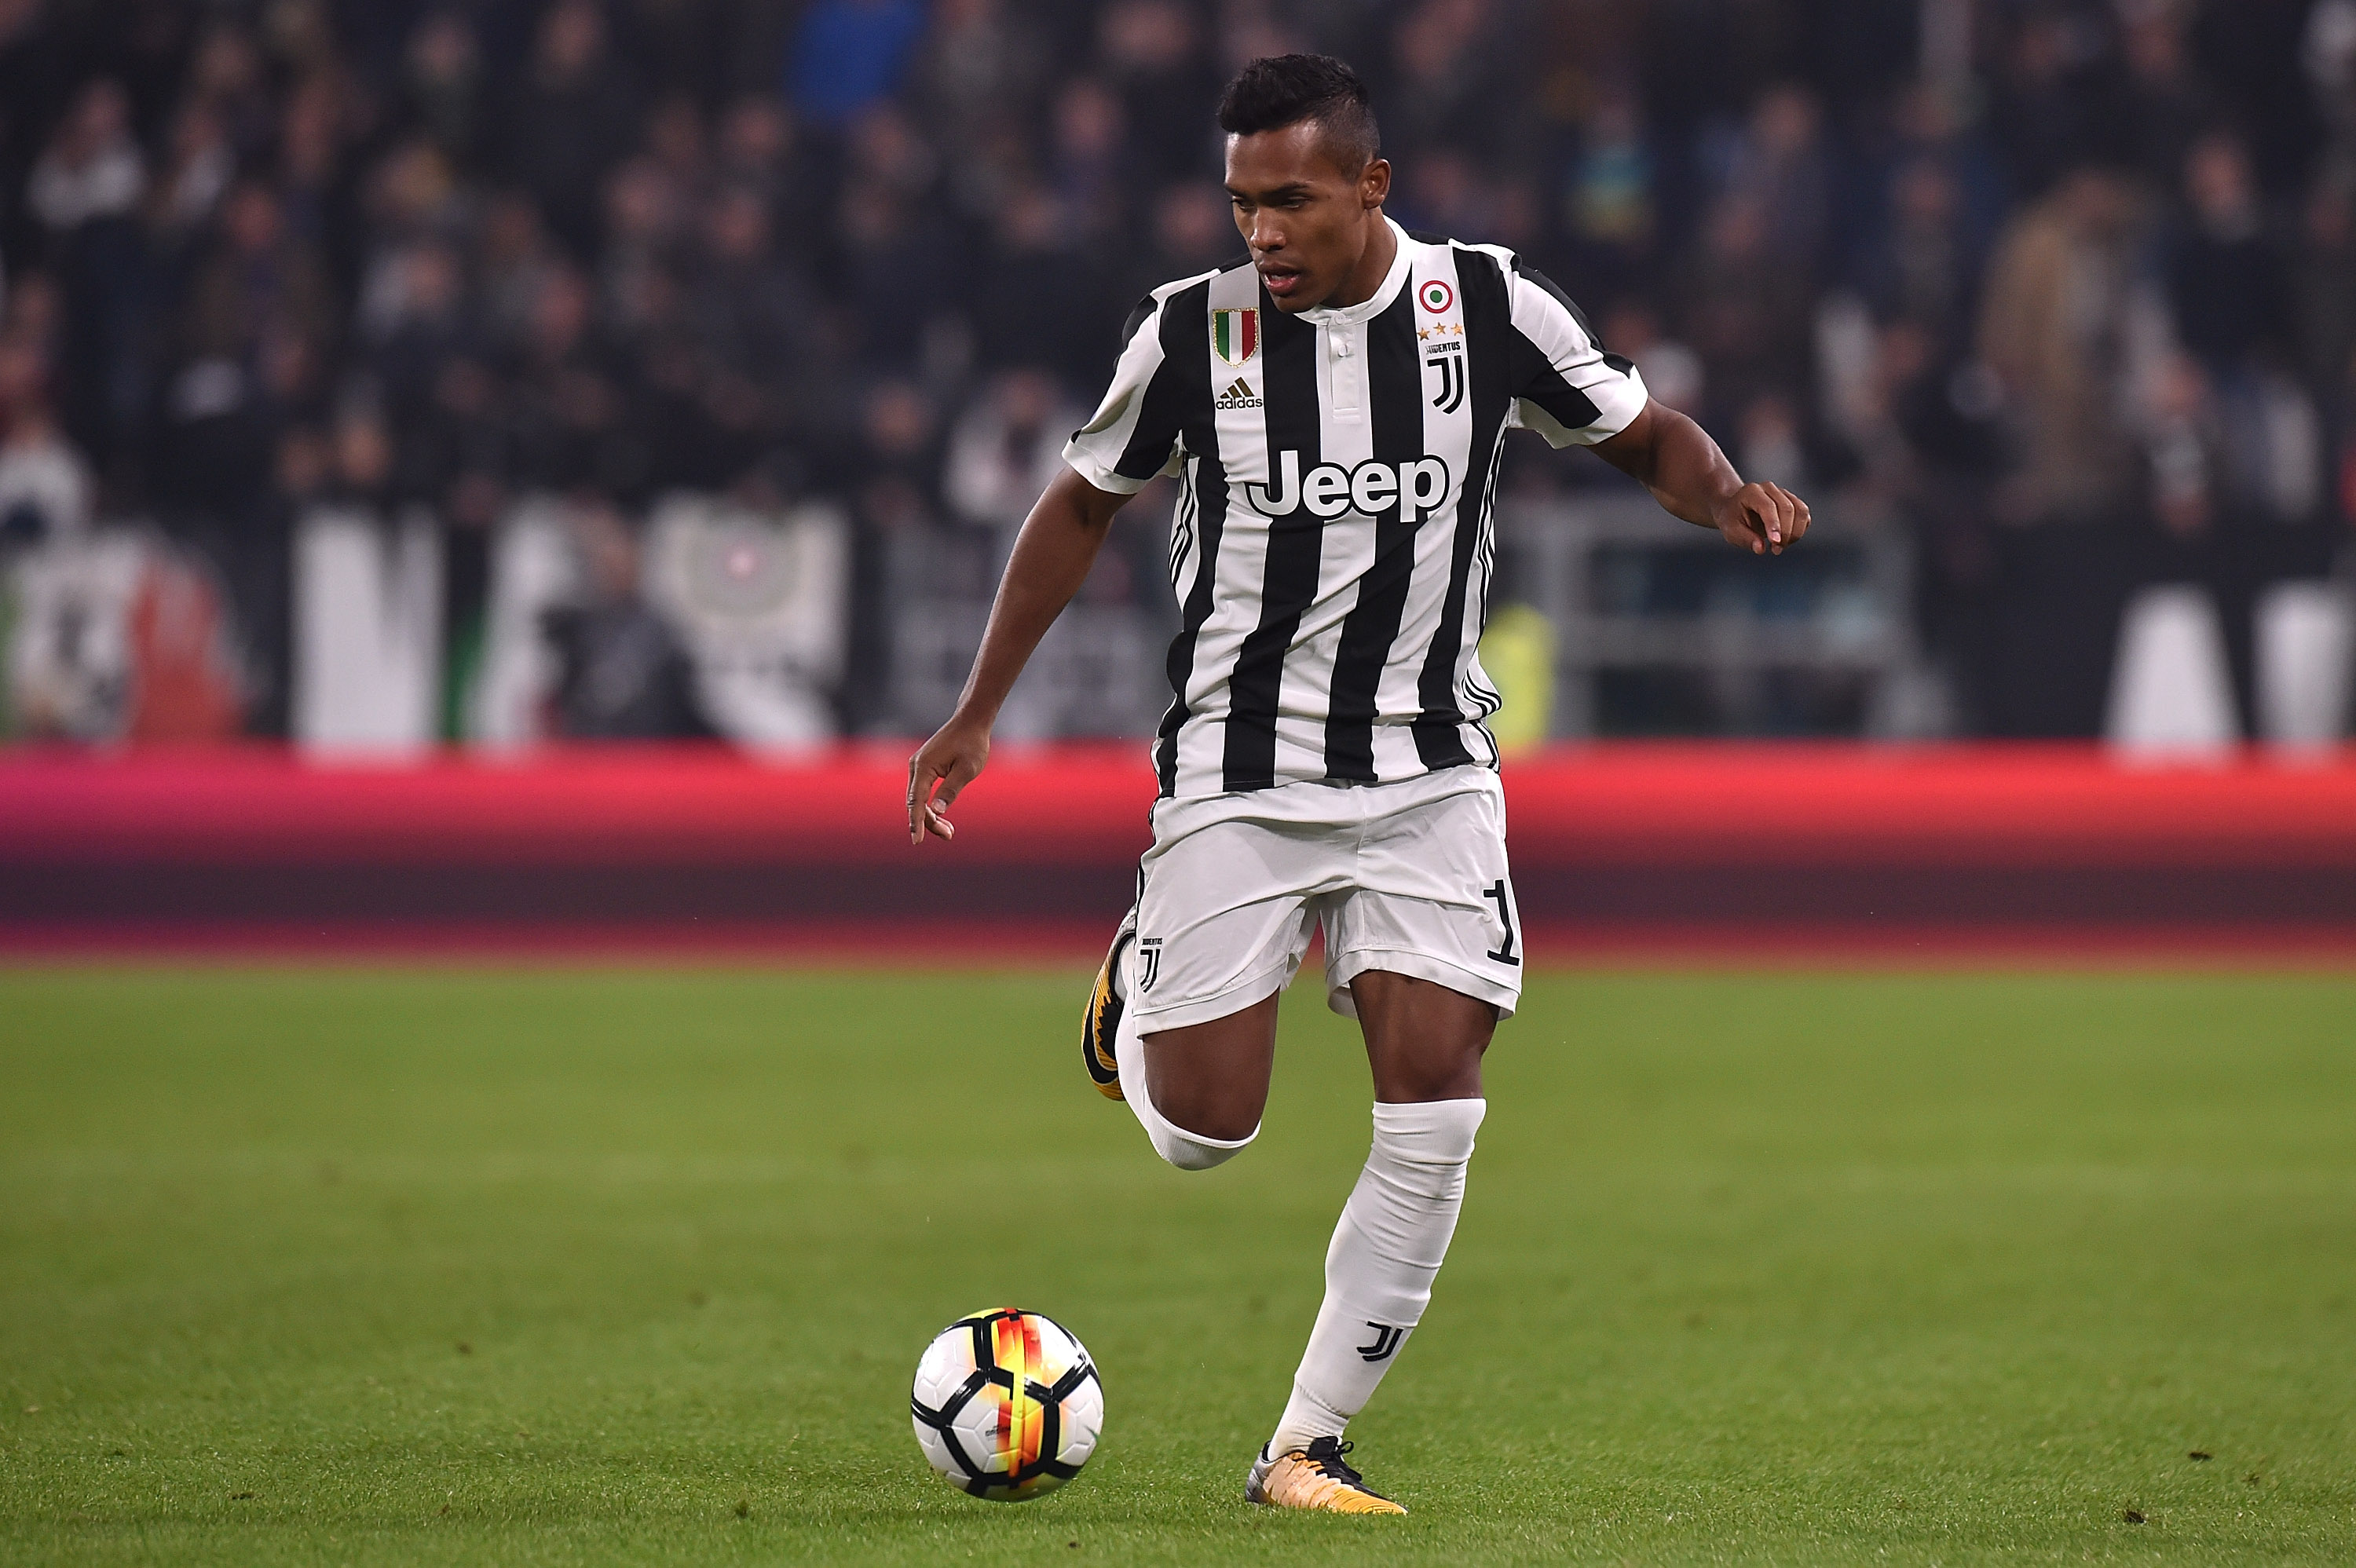 TURIN, ITALY - OCTOBER 25:  Alex Sandro of Juventus in action during the Serie A match between Juventus and Spal on October 25, 2017 in Turin, Italy.  (Photo by Tullio M. Puglia/Getty Images)